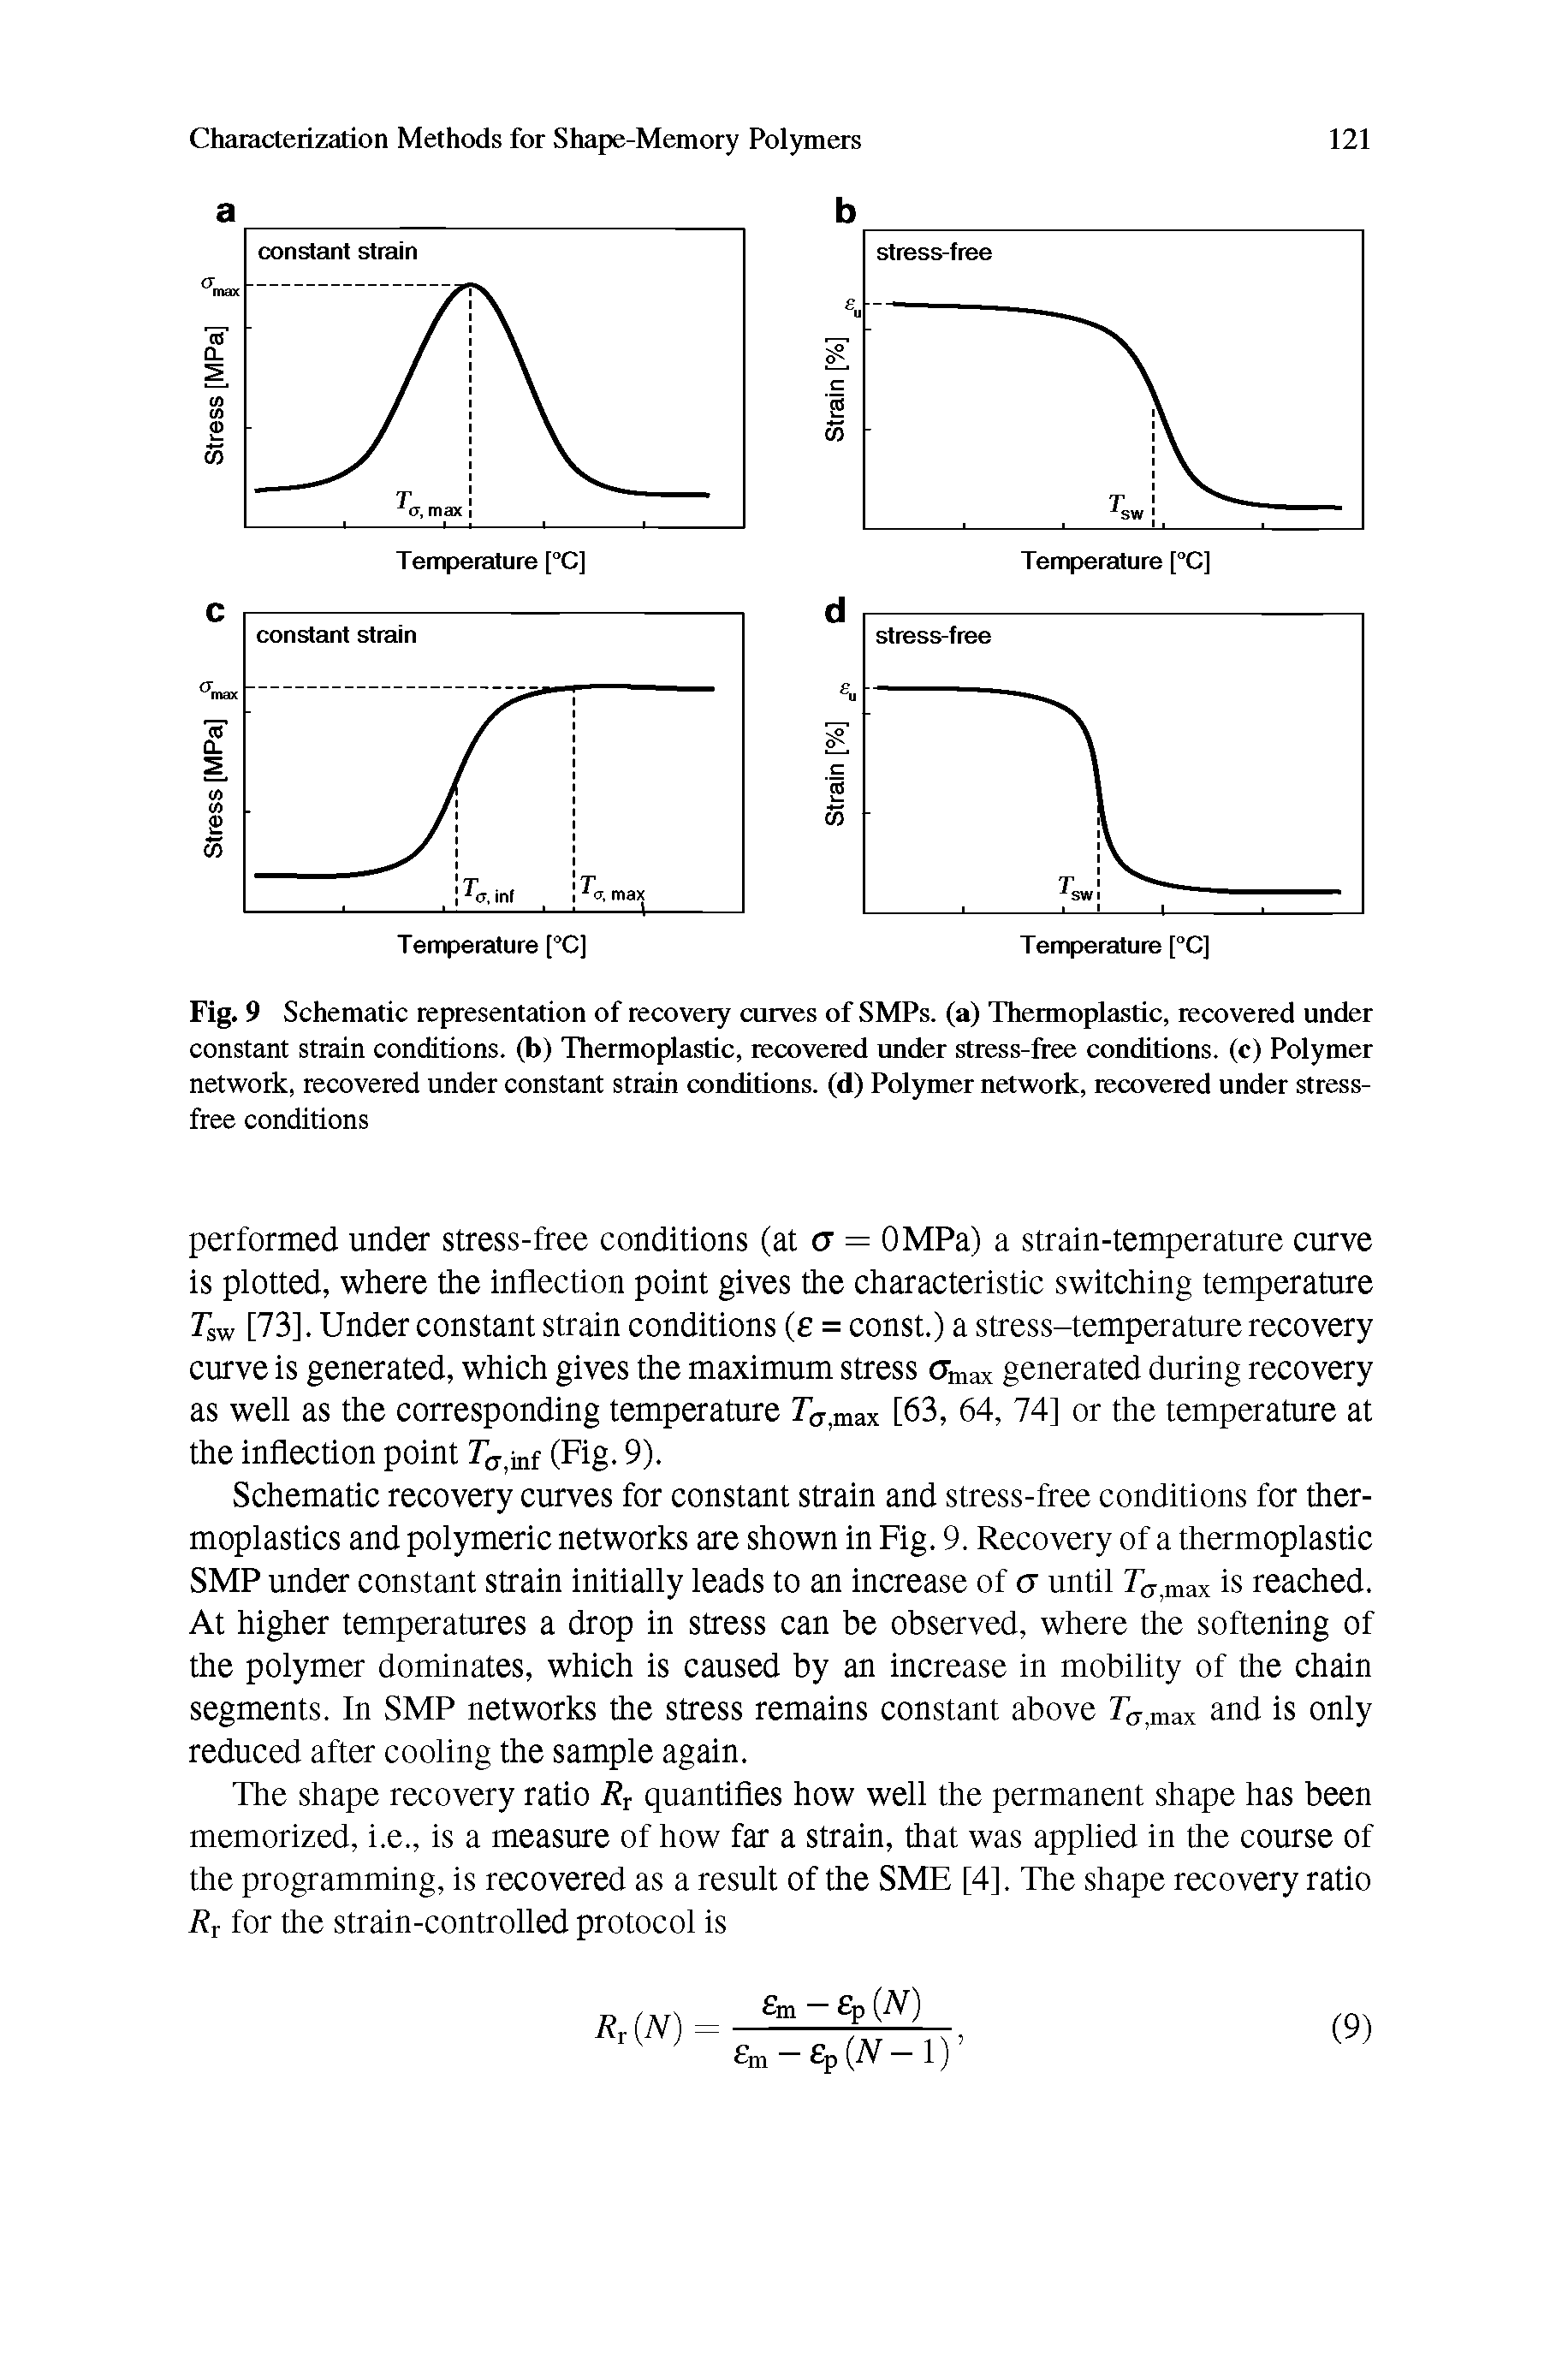 Schematic recovery curves for constant strain and stress-free conditions for thermoplastics and polymeric networks are shown in Fig. 9. Recovery of a thermoplastic SMP under constant strain initially leads to an increase of cr until is reached. At higher temperatures a drop in stress can be observed, where the softening of the polymer dominates, which is caused by an increase in mobility of the chain segments. In SMP networks the stress remains constant above and is only reduced after cooling the sample again.